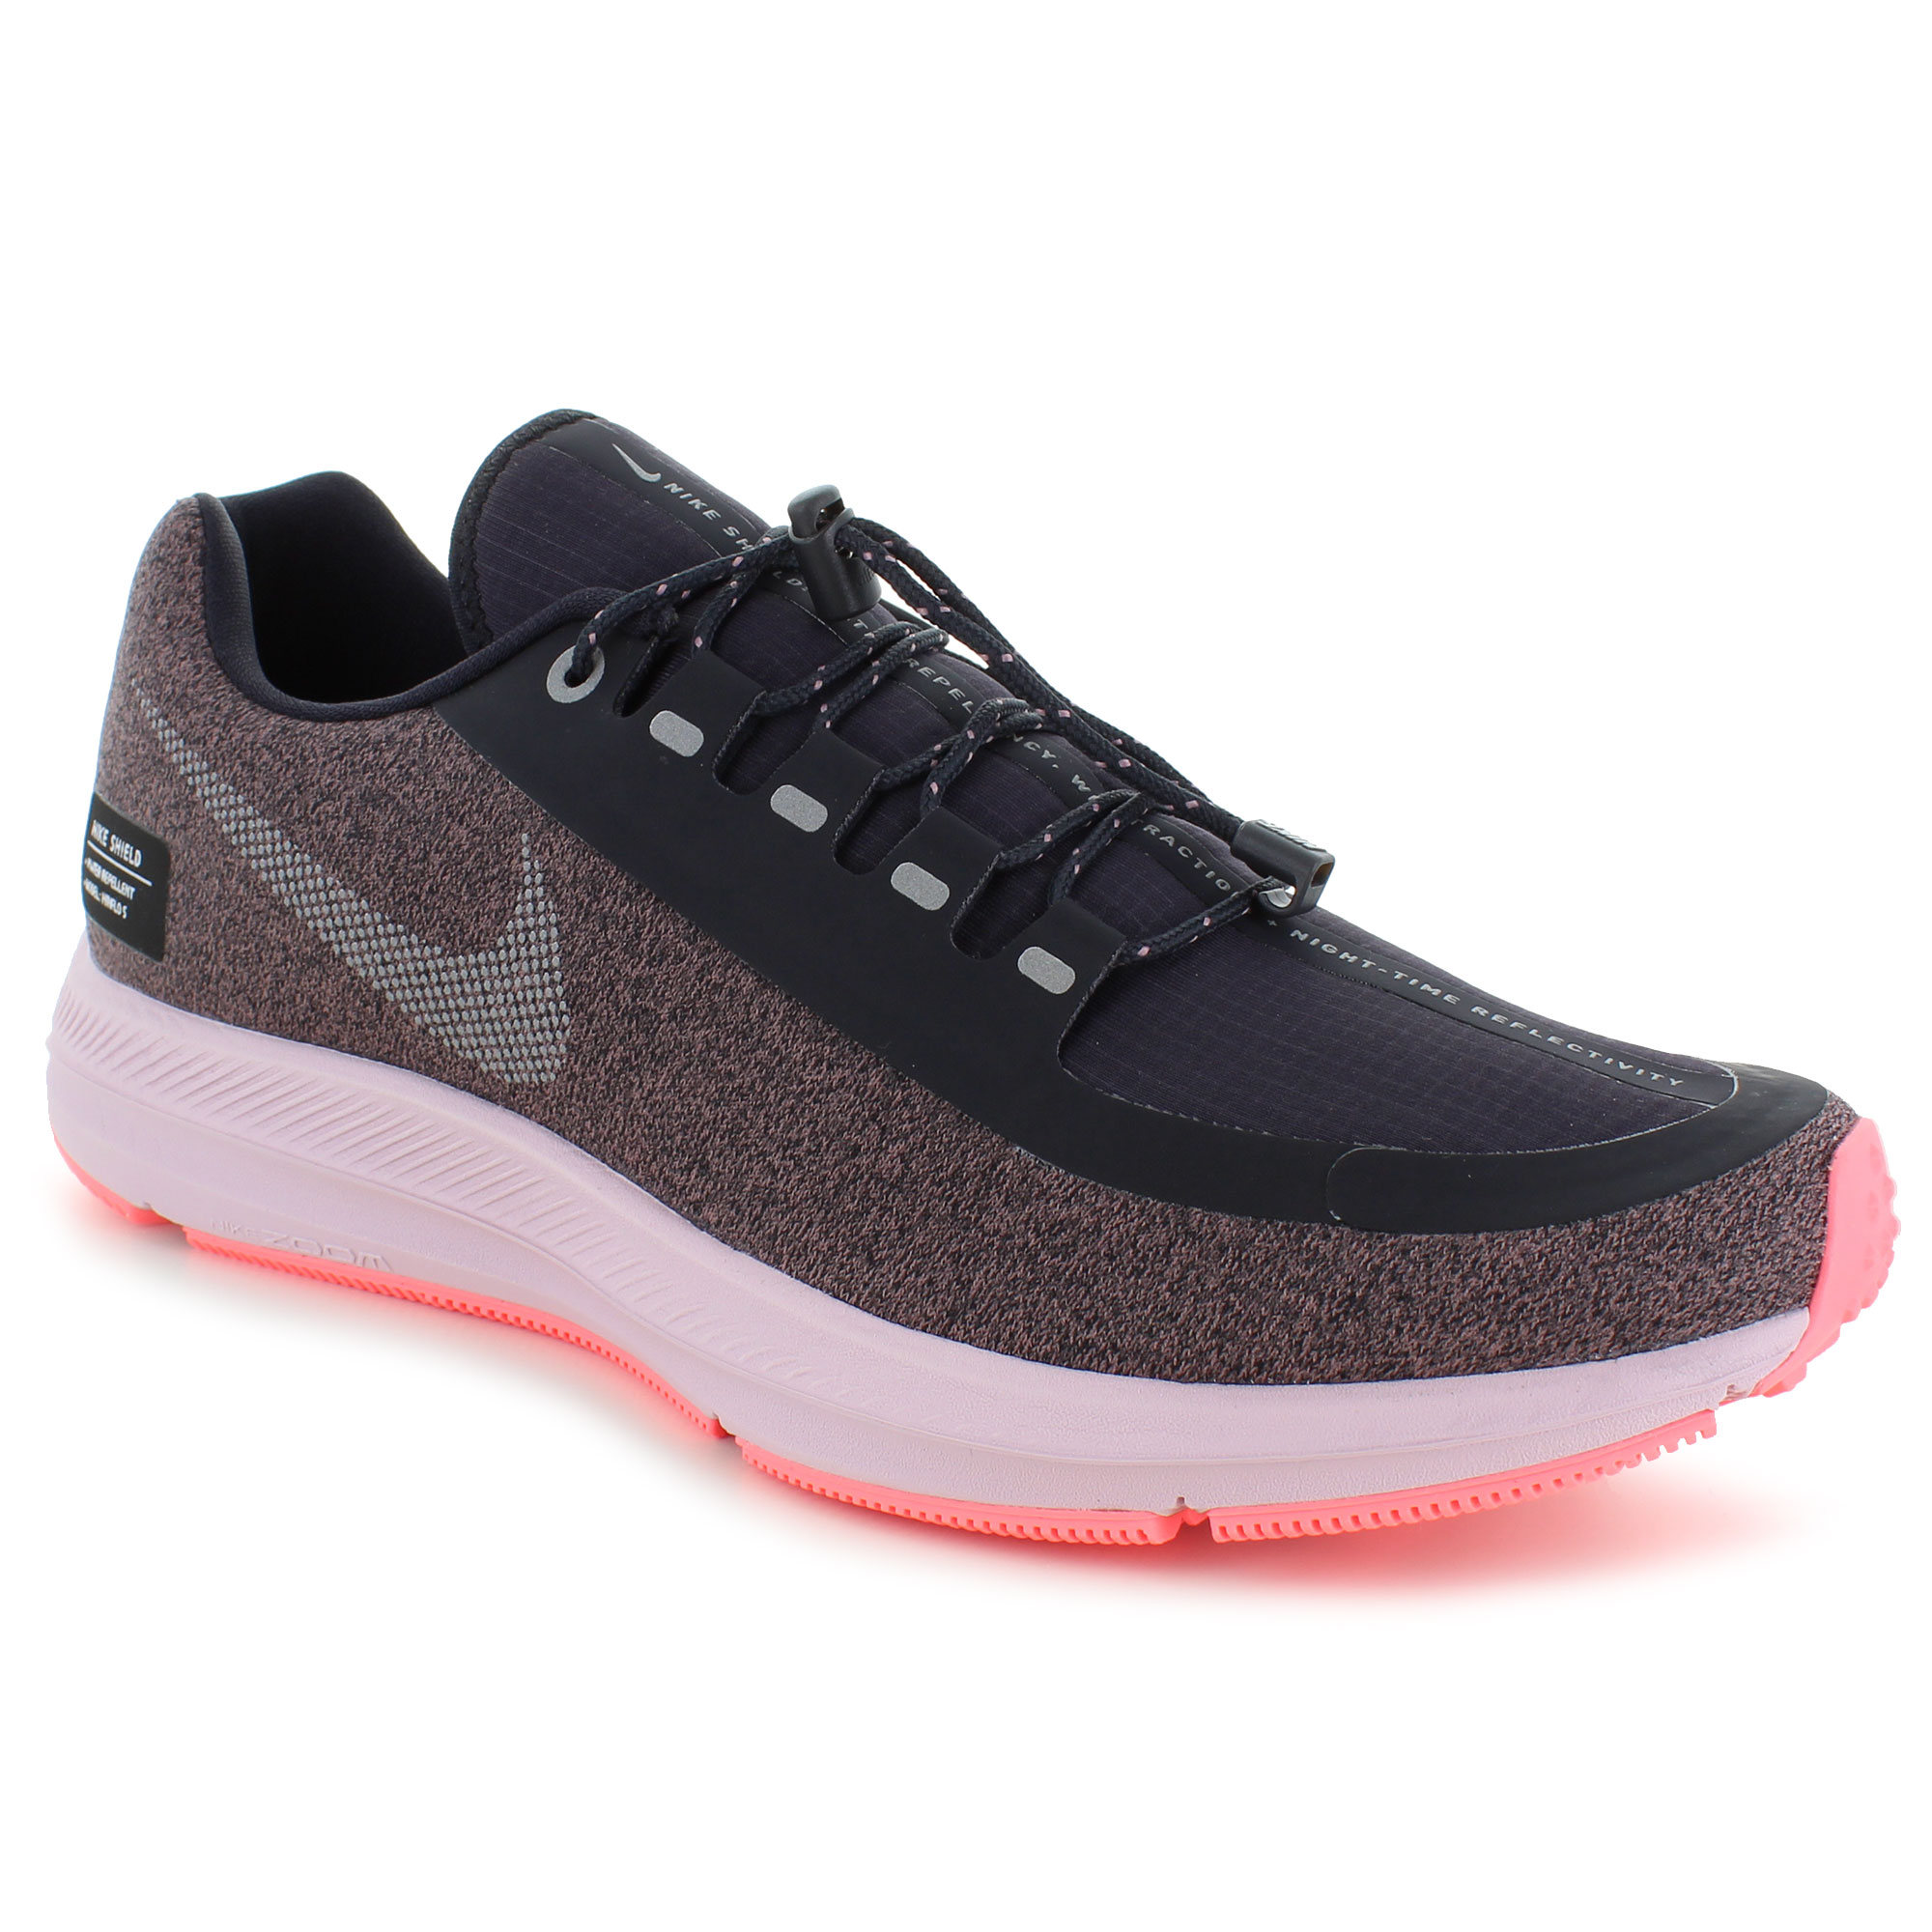 nike air zoom winflo 5 shield women's water resistant running shoes